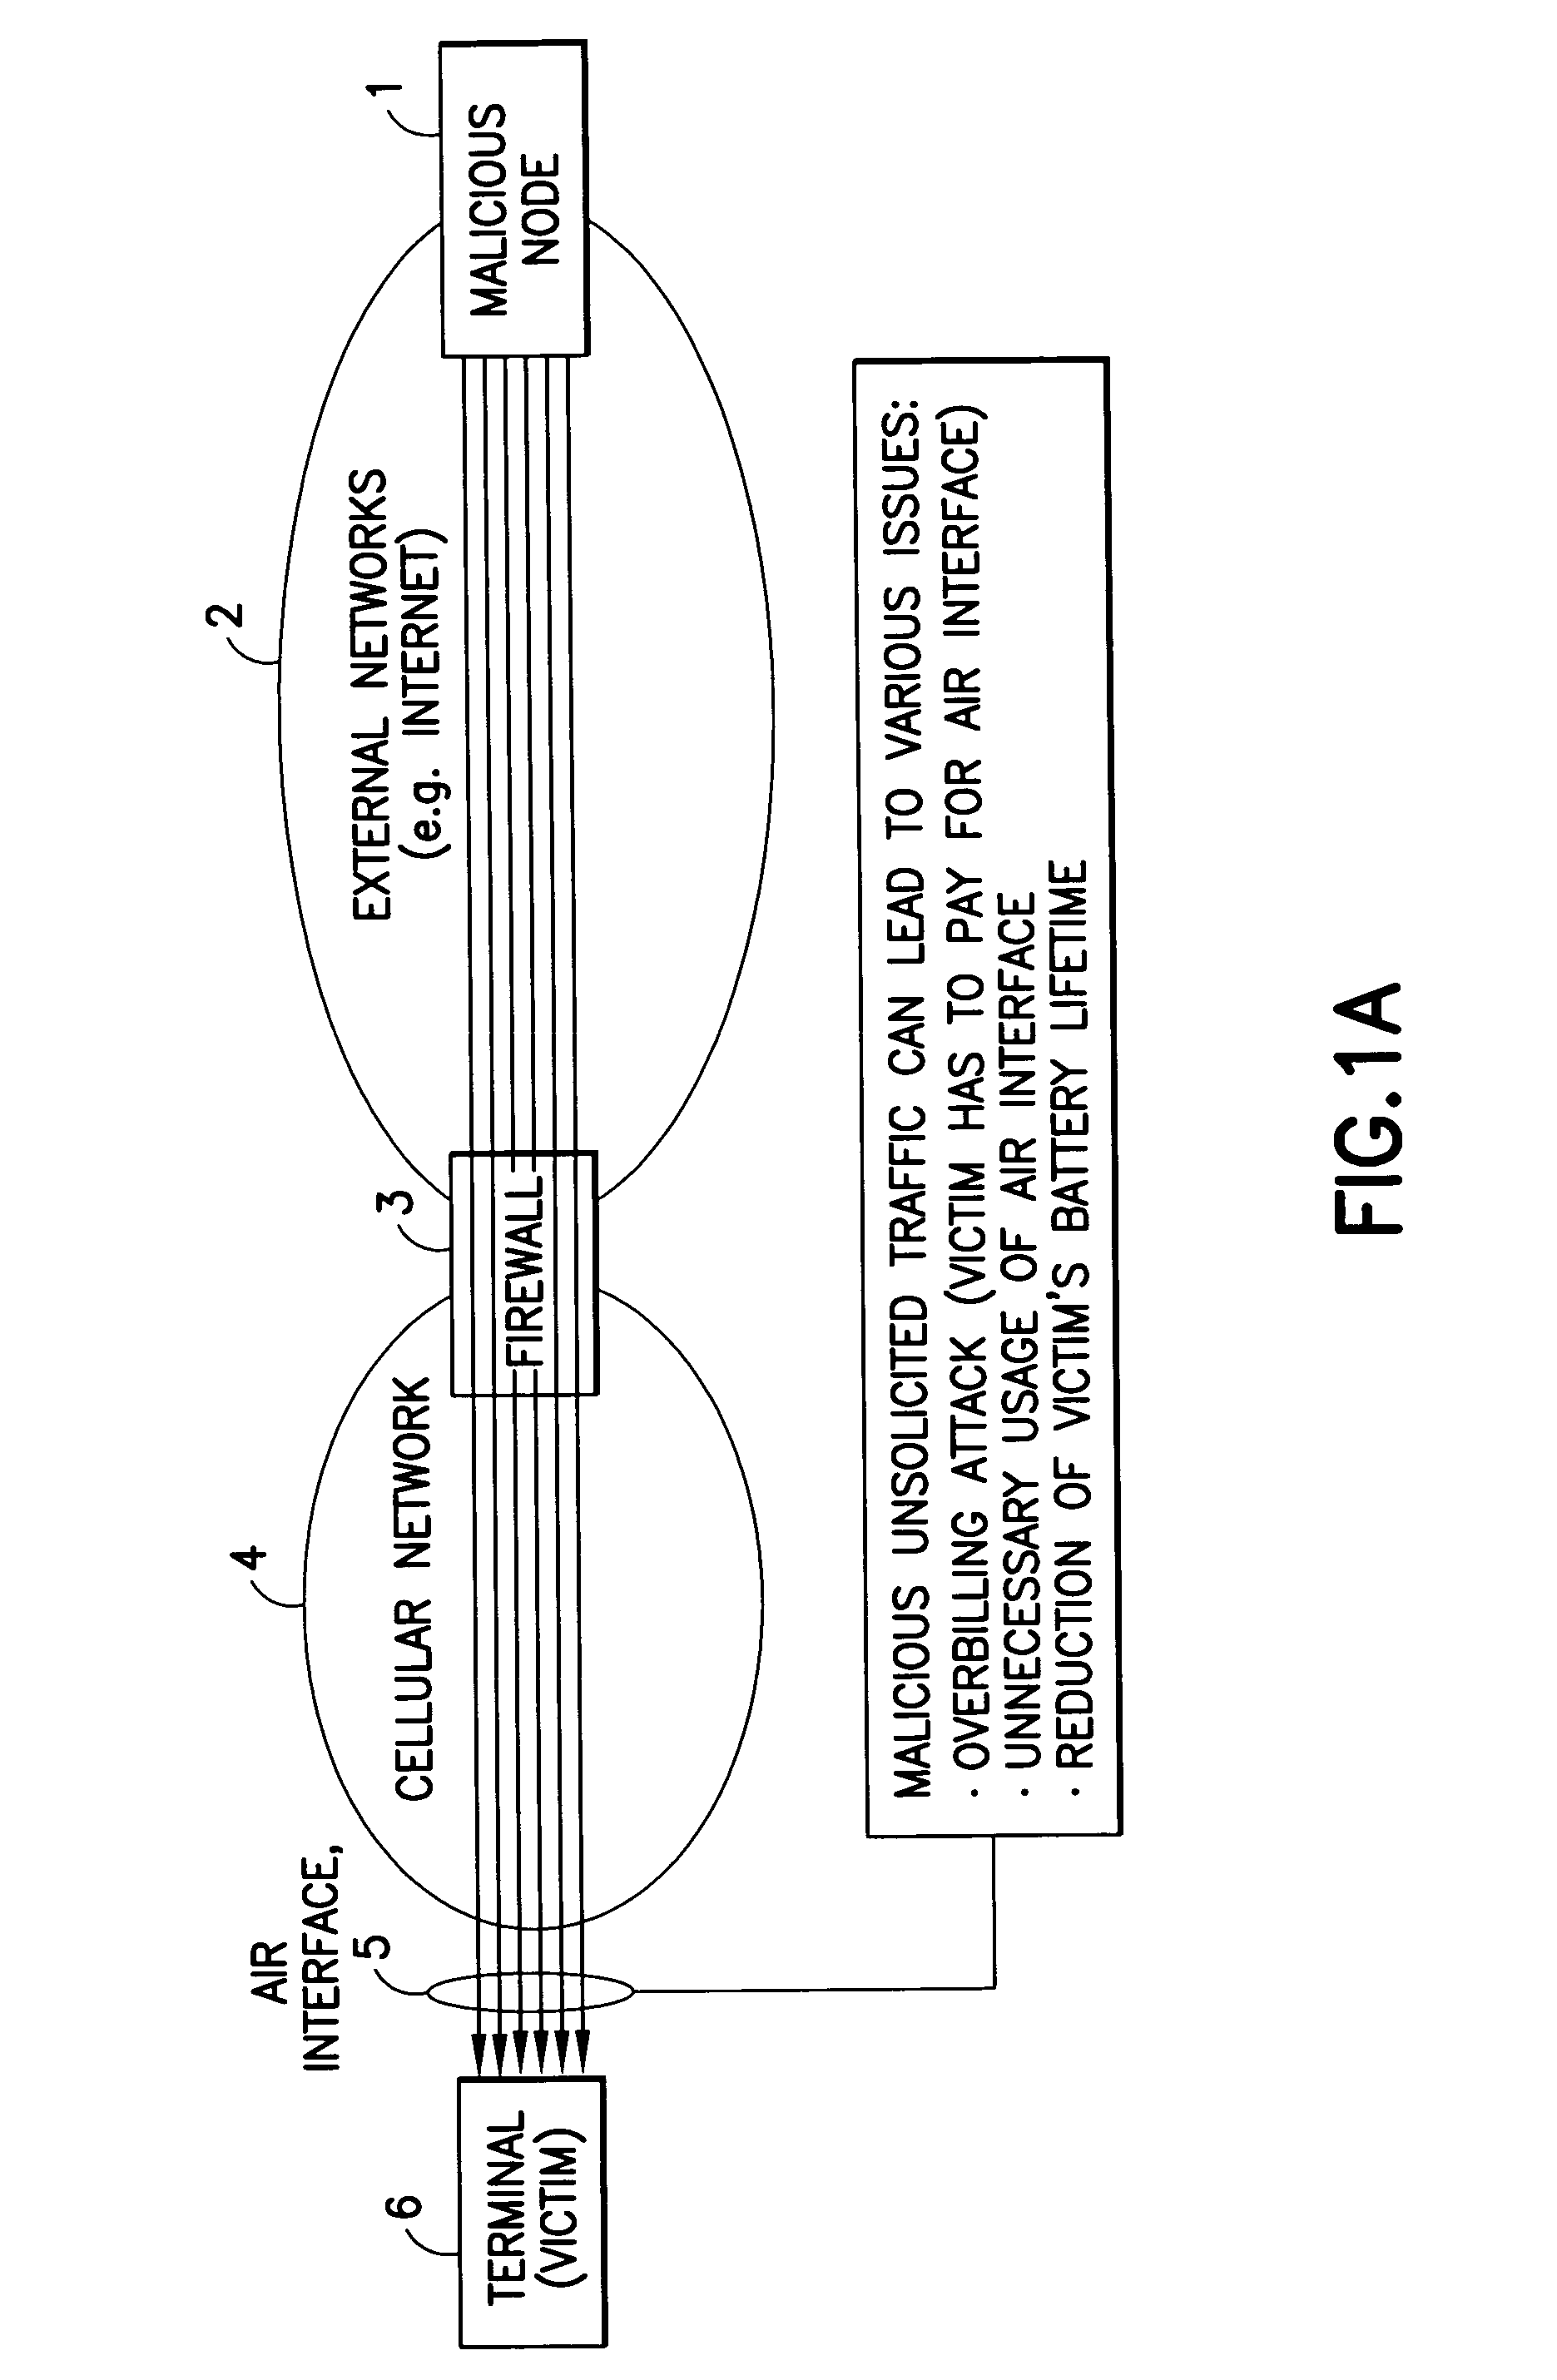 Apparatus, method and computer program product to reduce TCP flooding attacks while conserving wireless network bandwidth